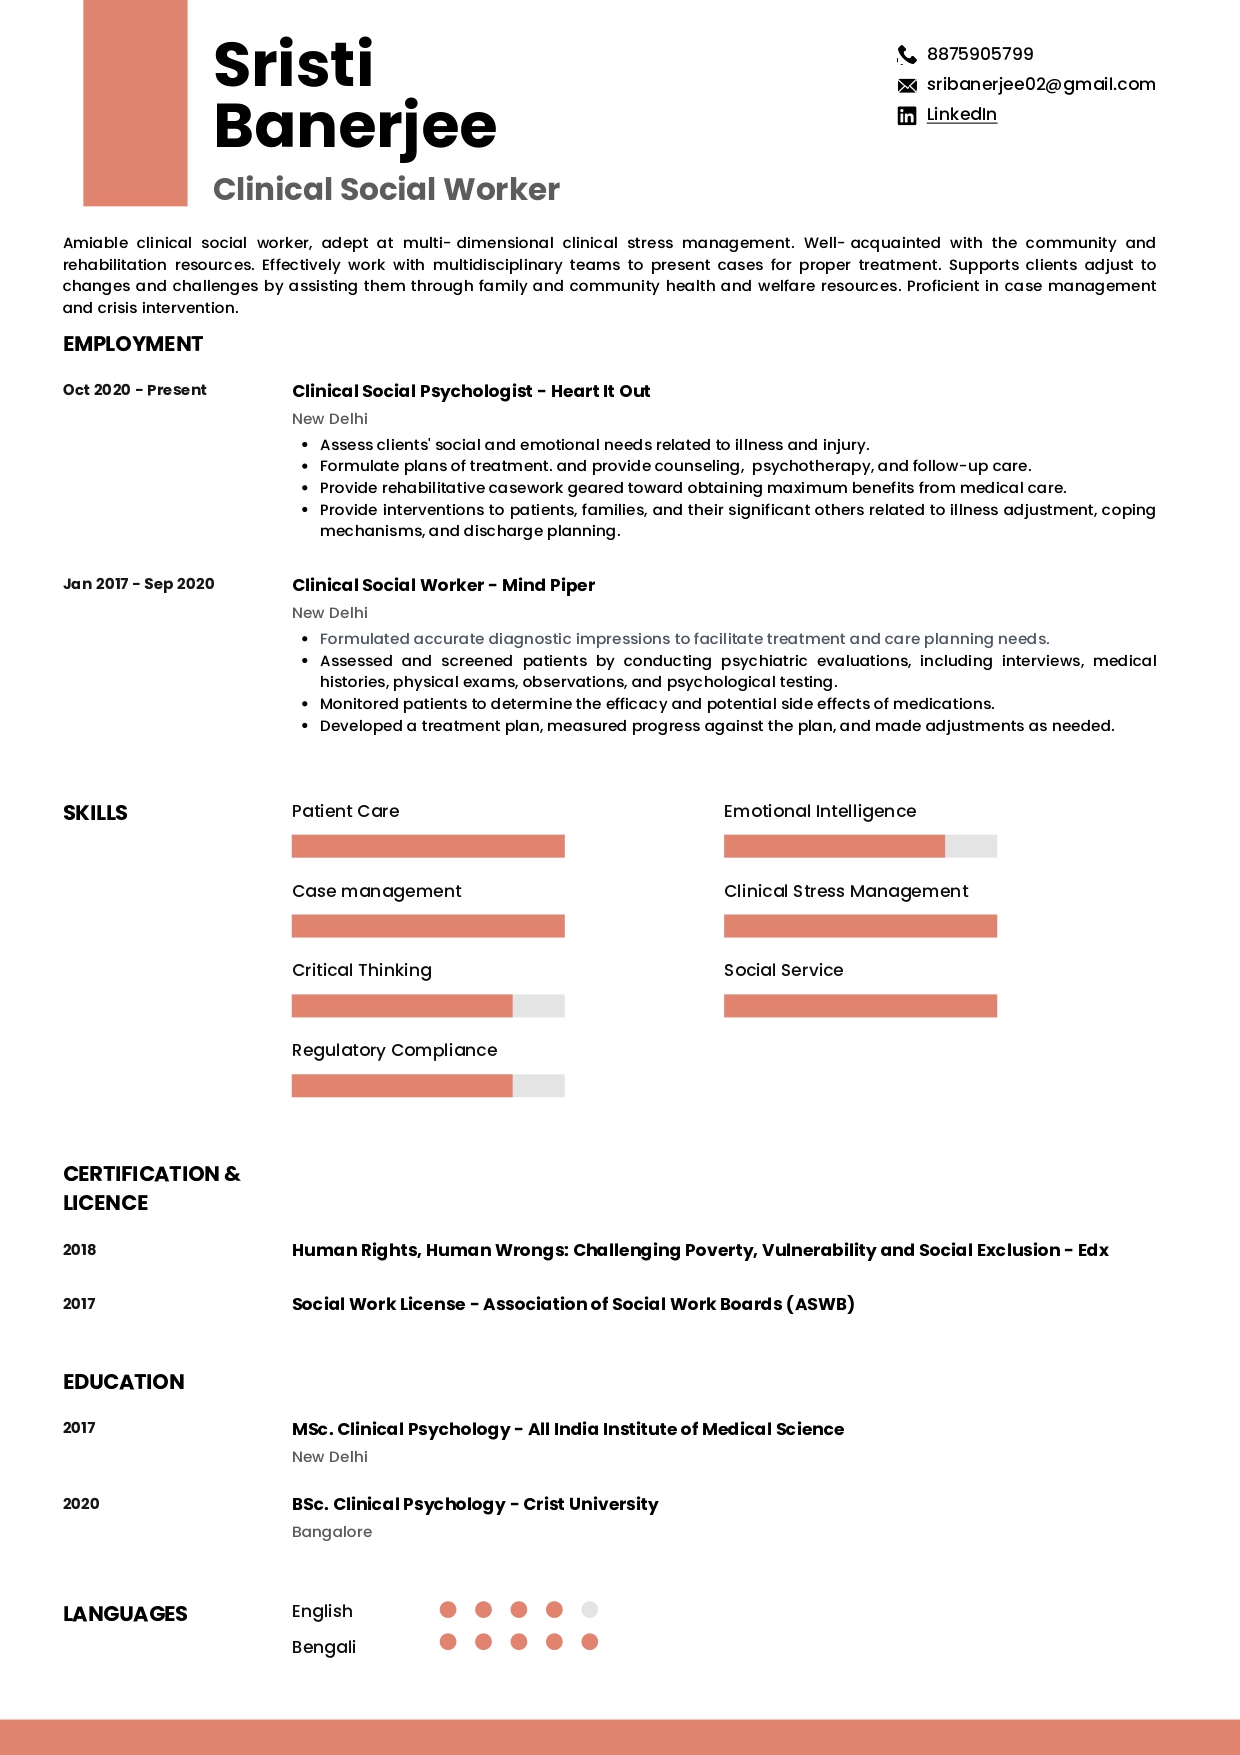 Sample Resume of Clinical Social Worker | Free Resume Templates & Samples on Resumod.co